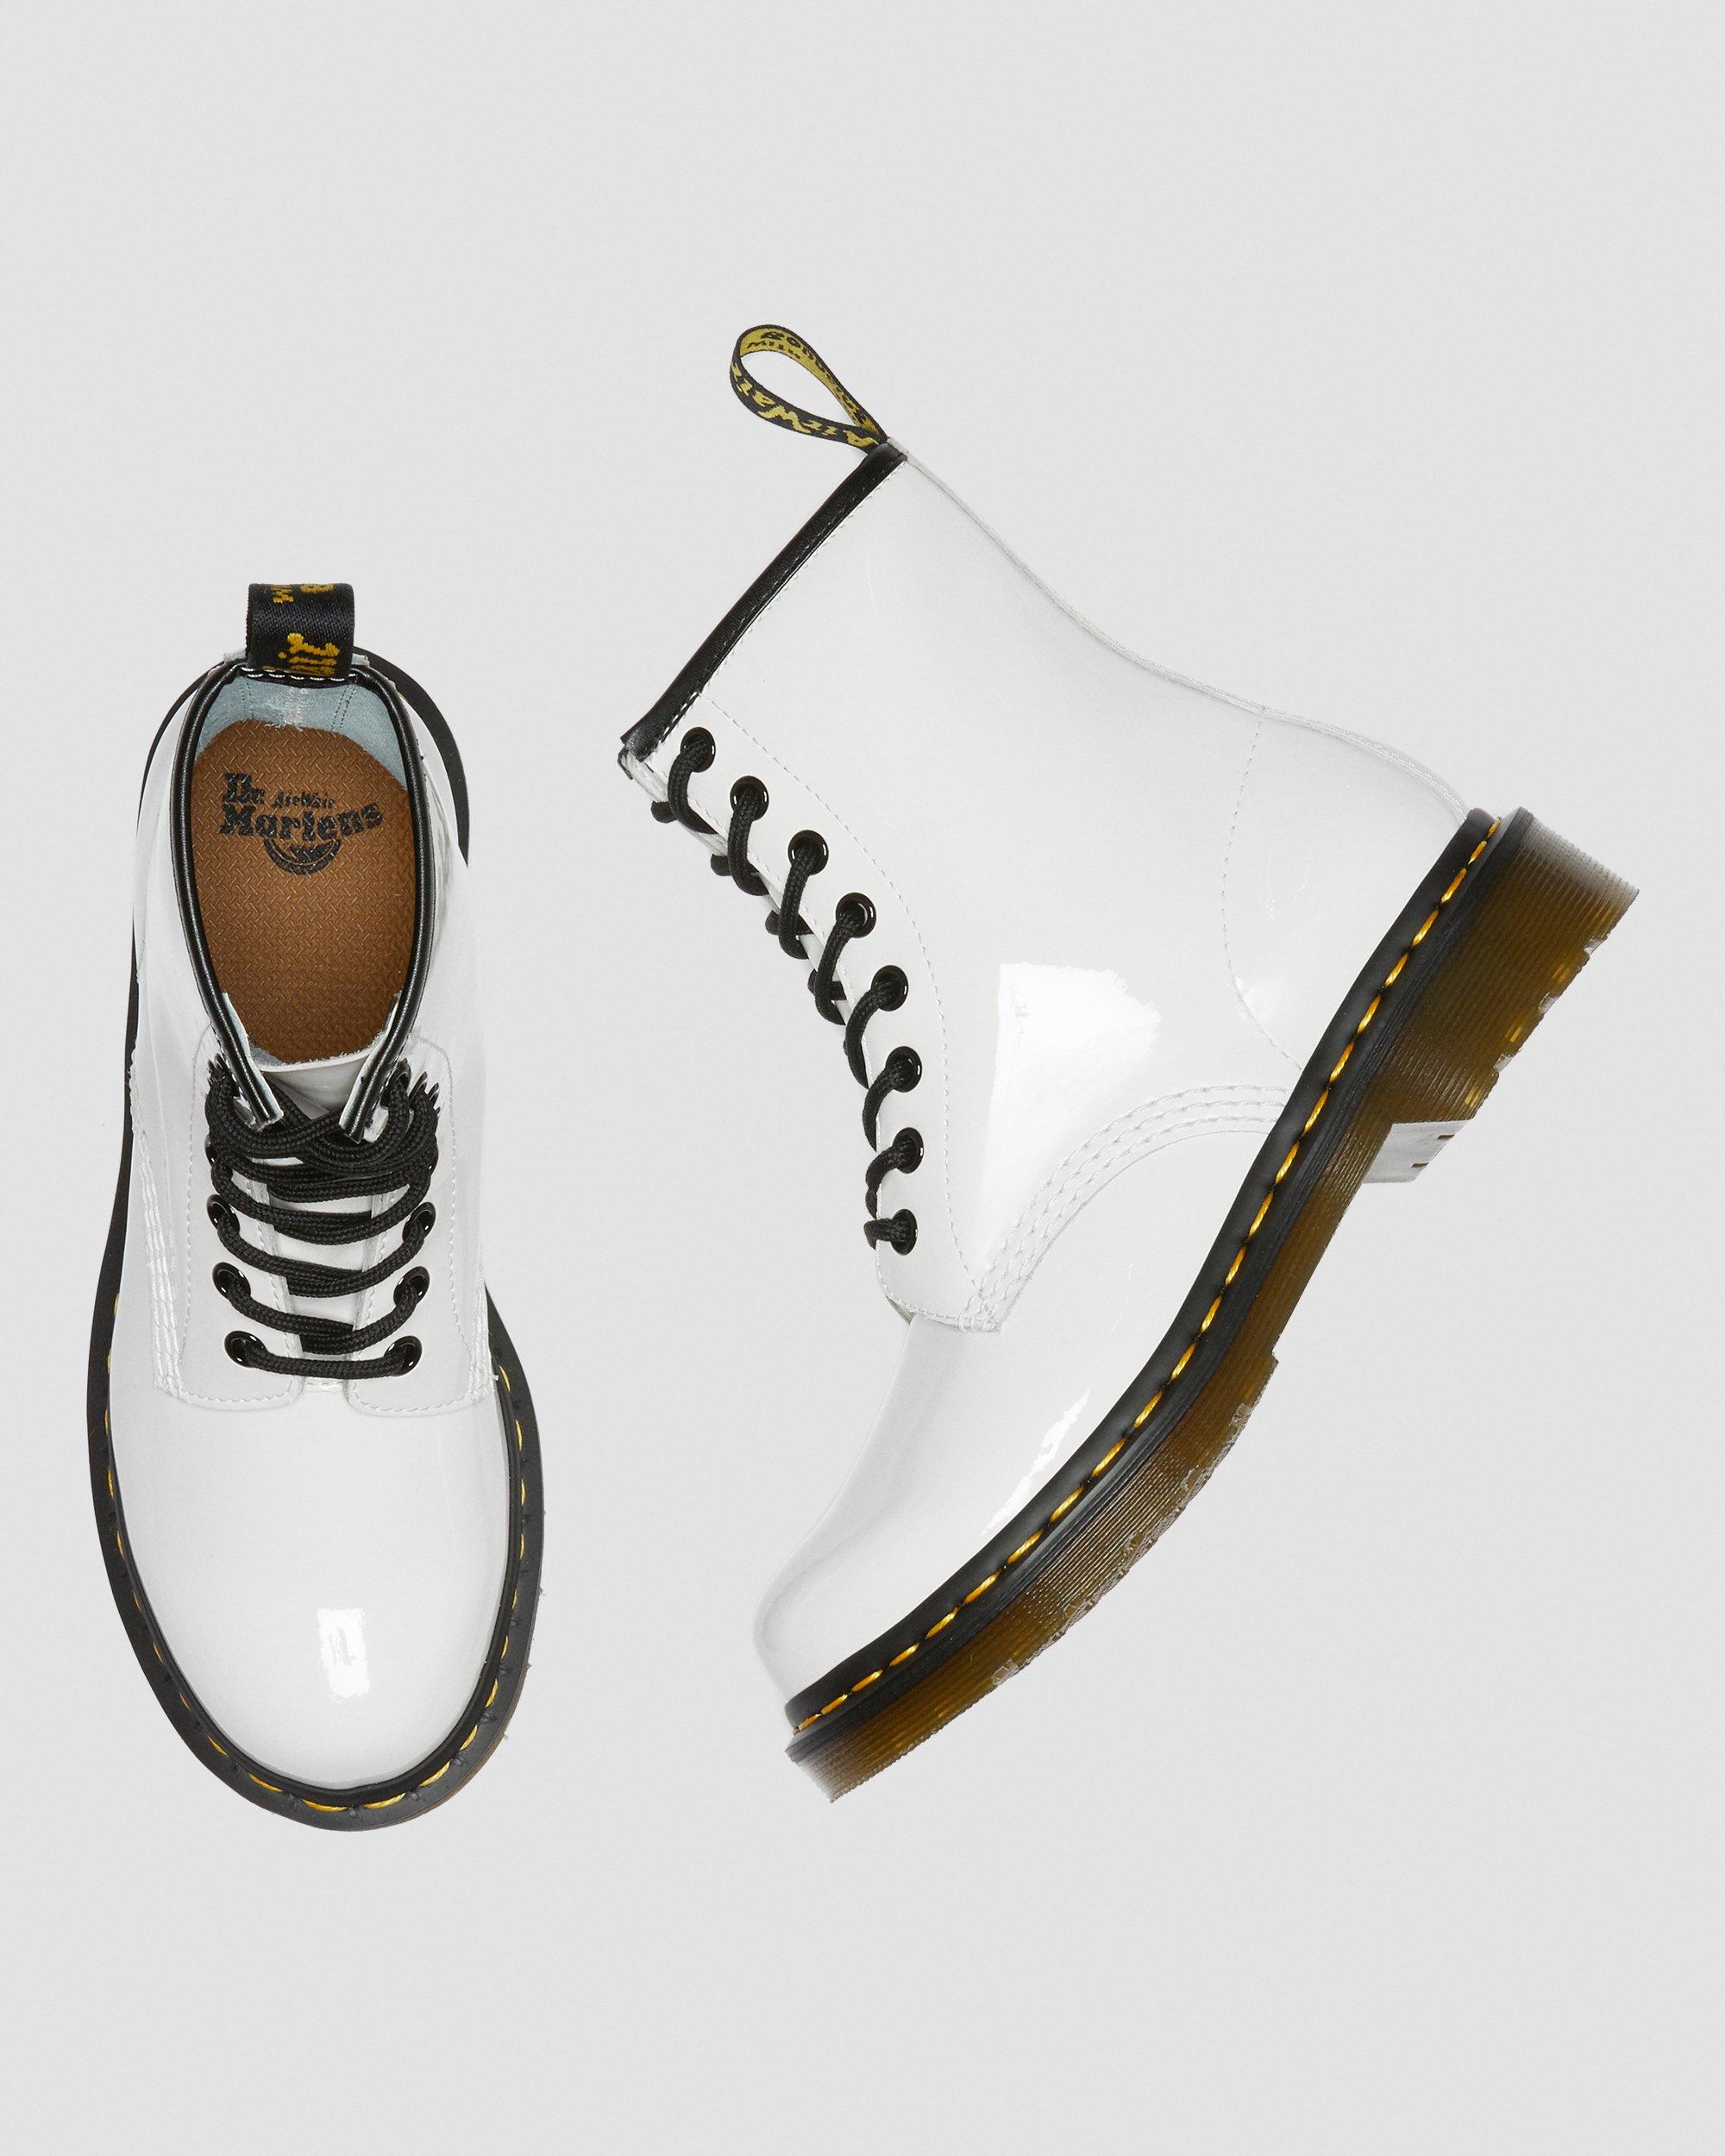 BNWB BEAUTIFUL PATENT LEATHER LAMPER CLASSIC WHITE 8 EYELET BOOTS By Dr.Martens 